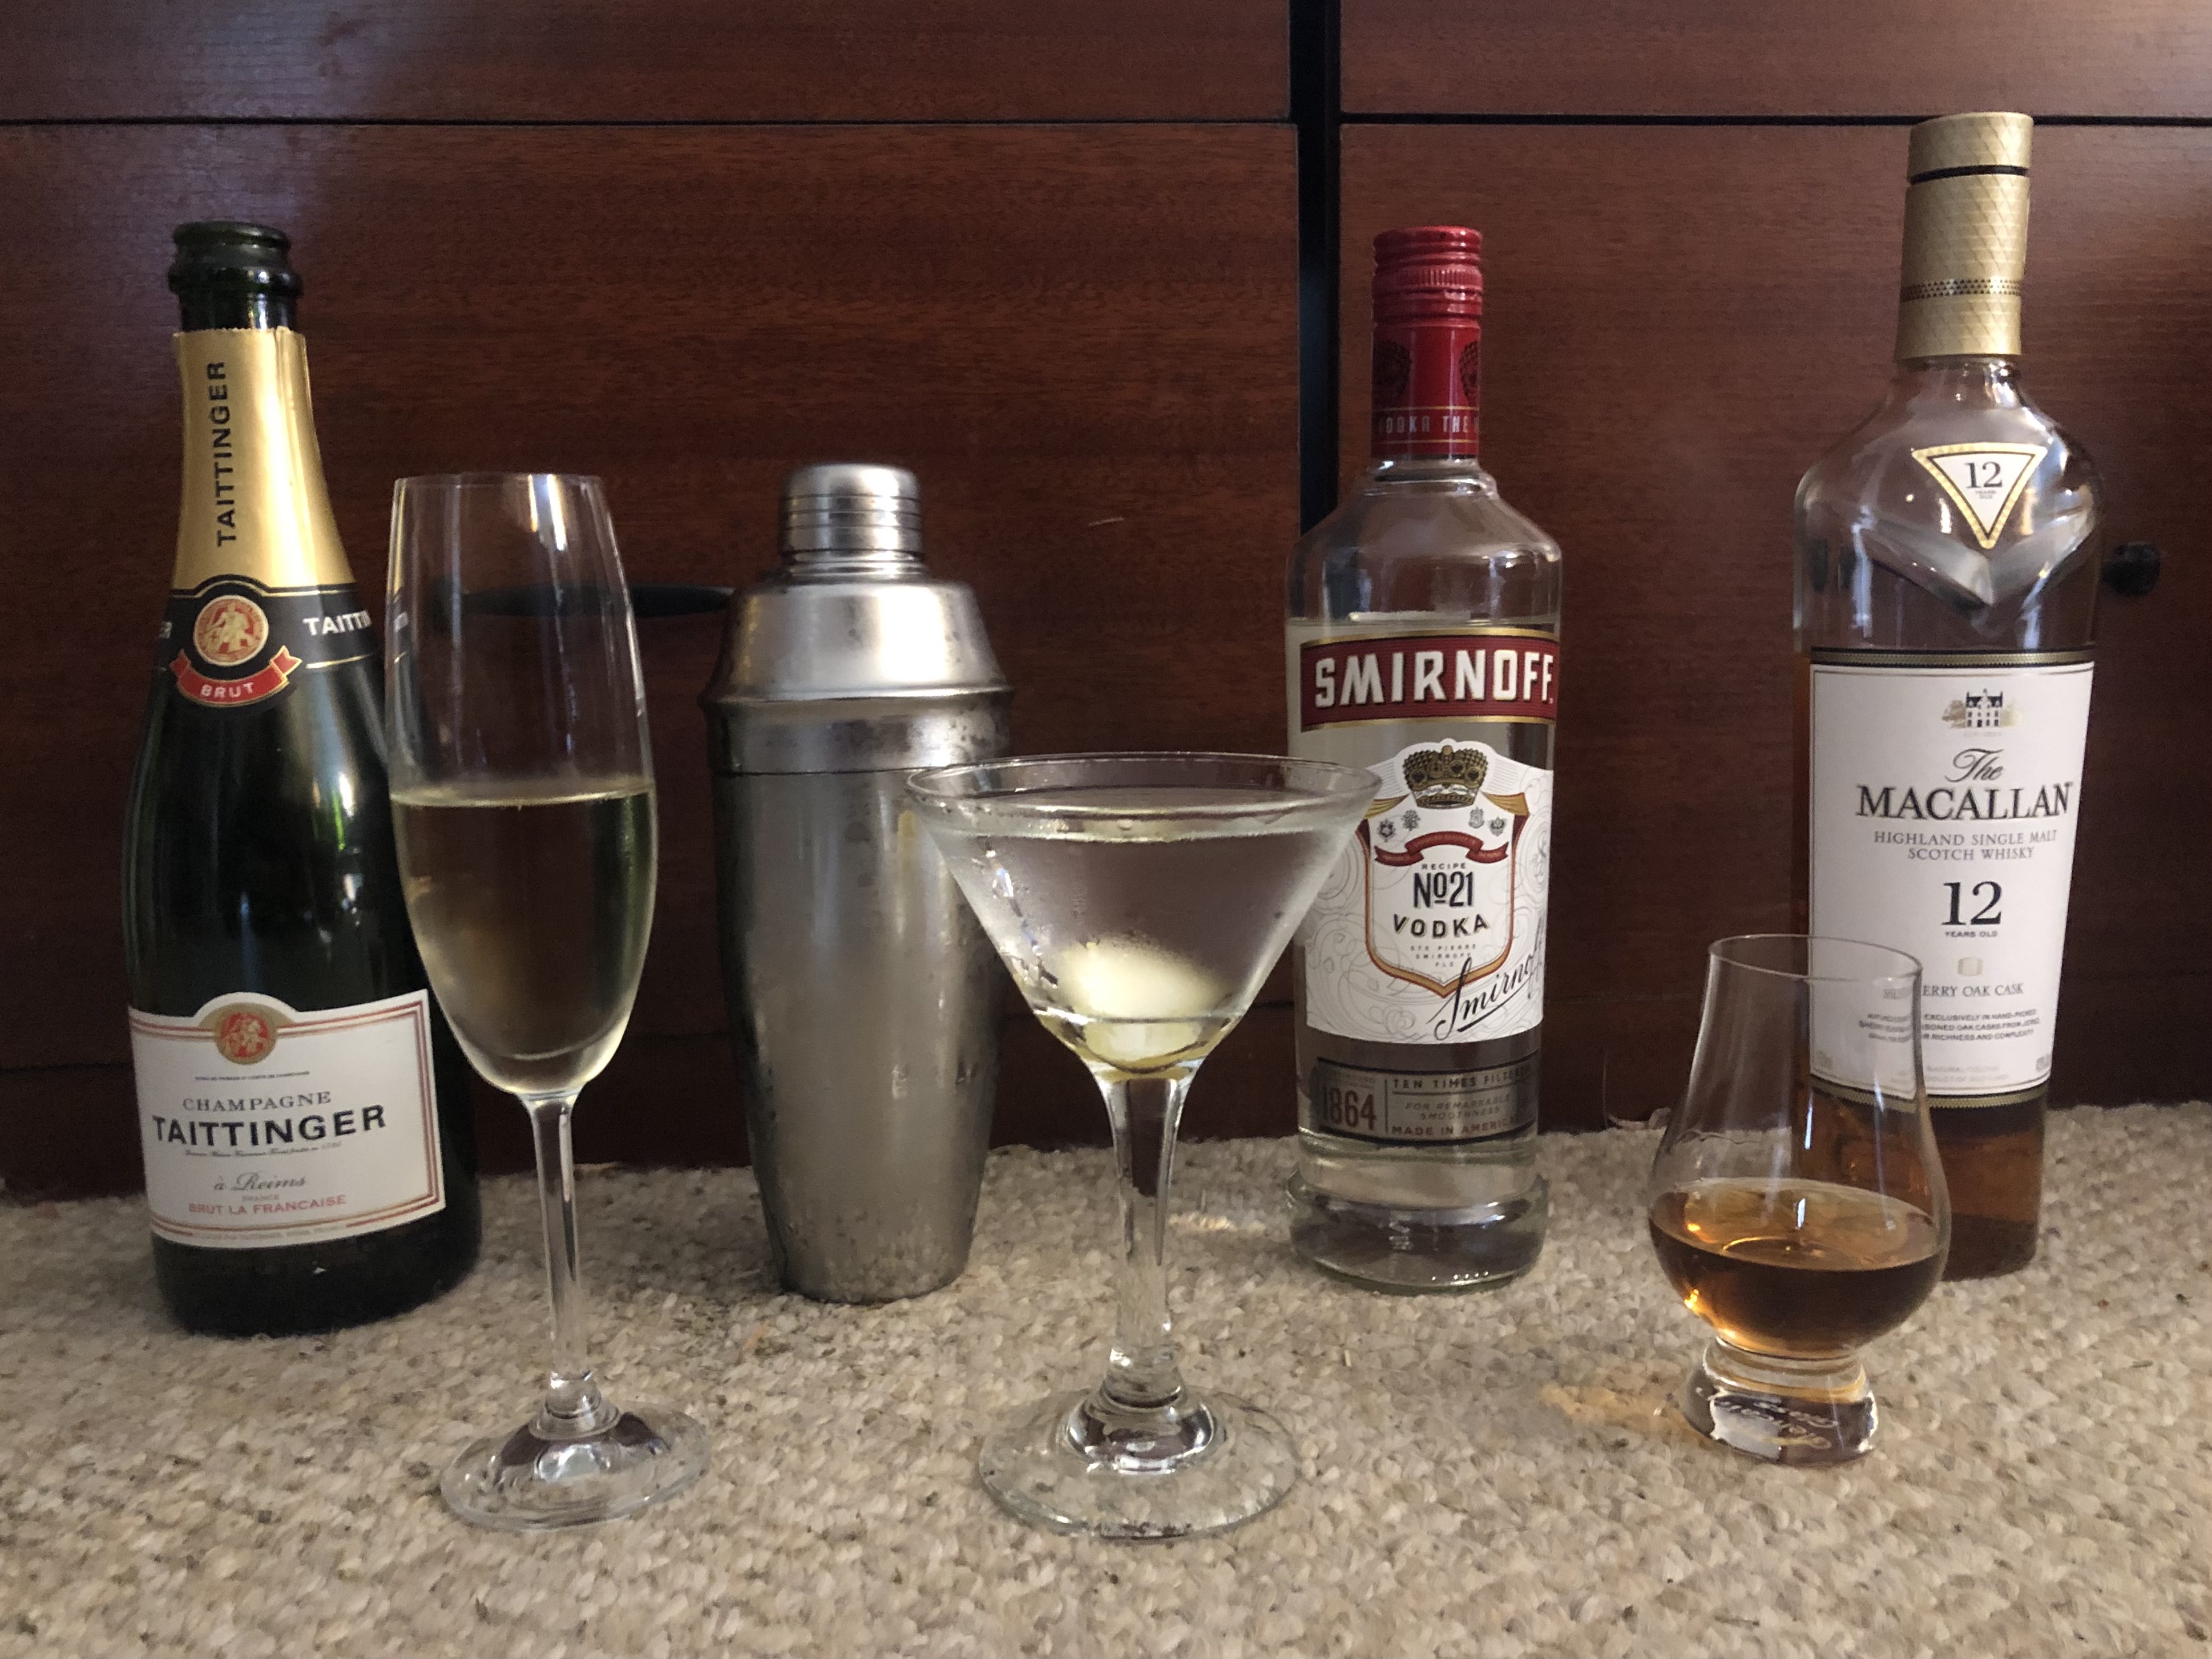 How-To Make The Official 007 Spectre Martini